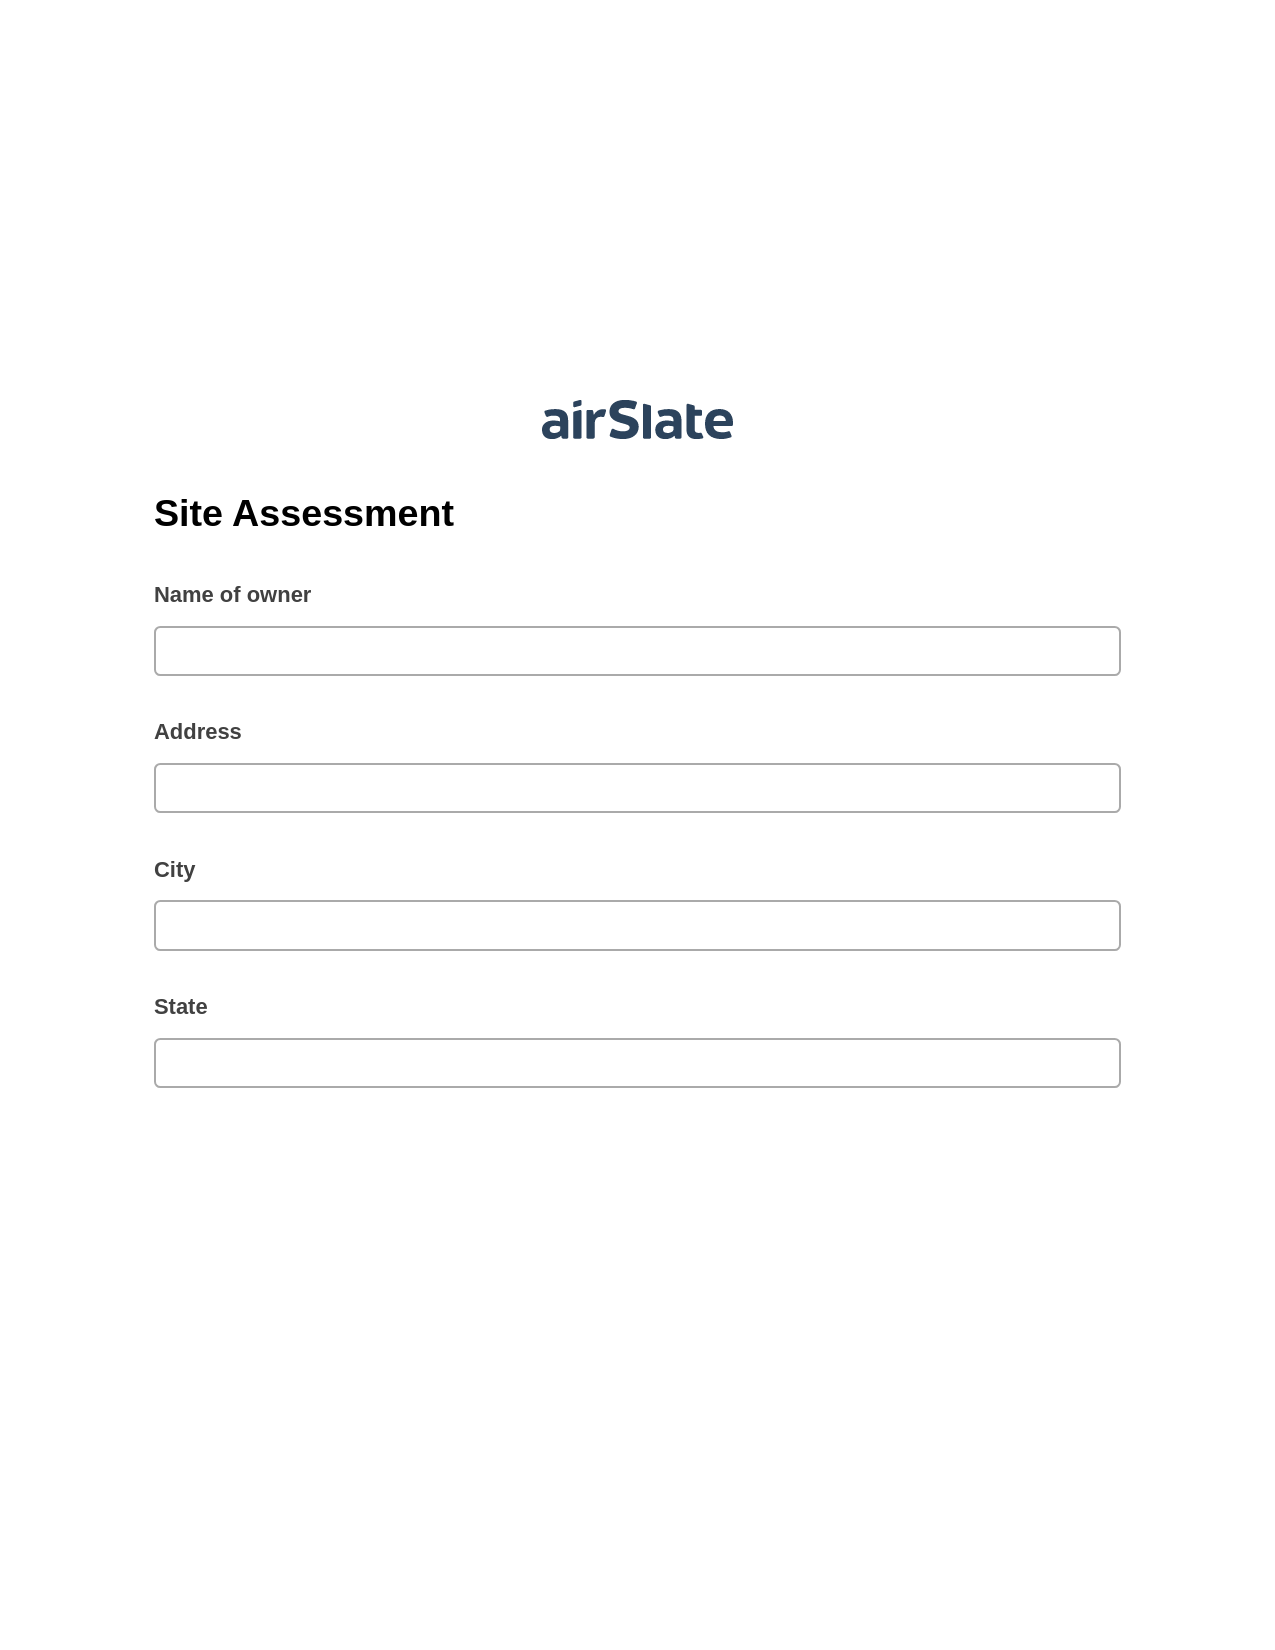 Multirole Site Assessment Pre-fill from CSV File Bot, Assign Roles to Recipients Bot, Post-finish Document Bot